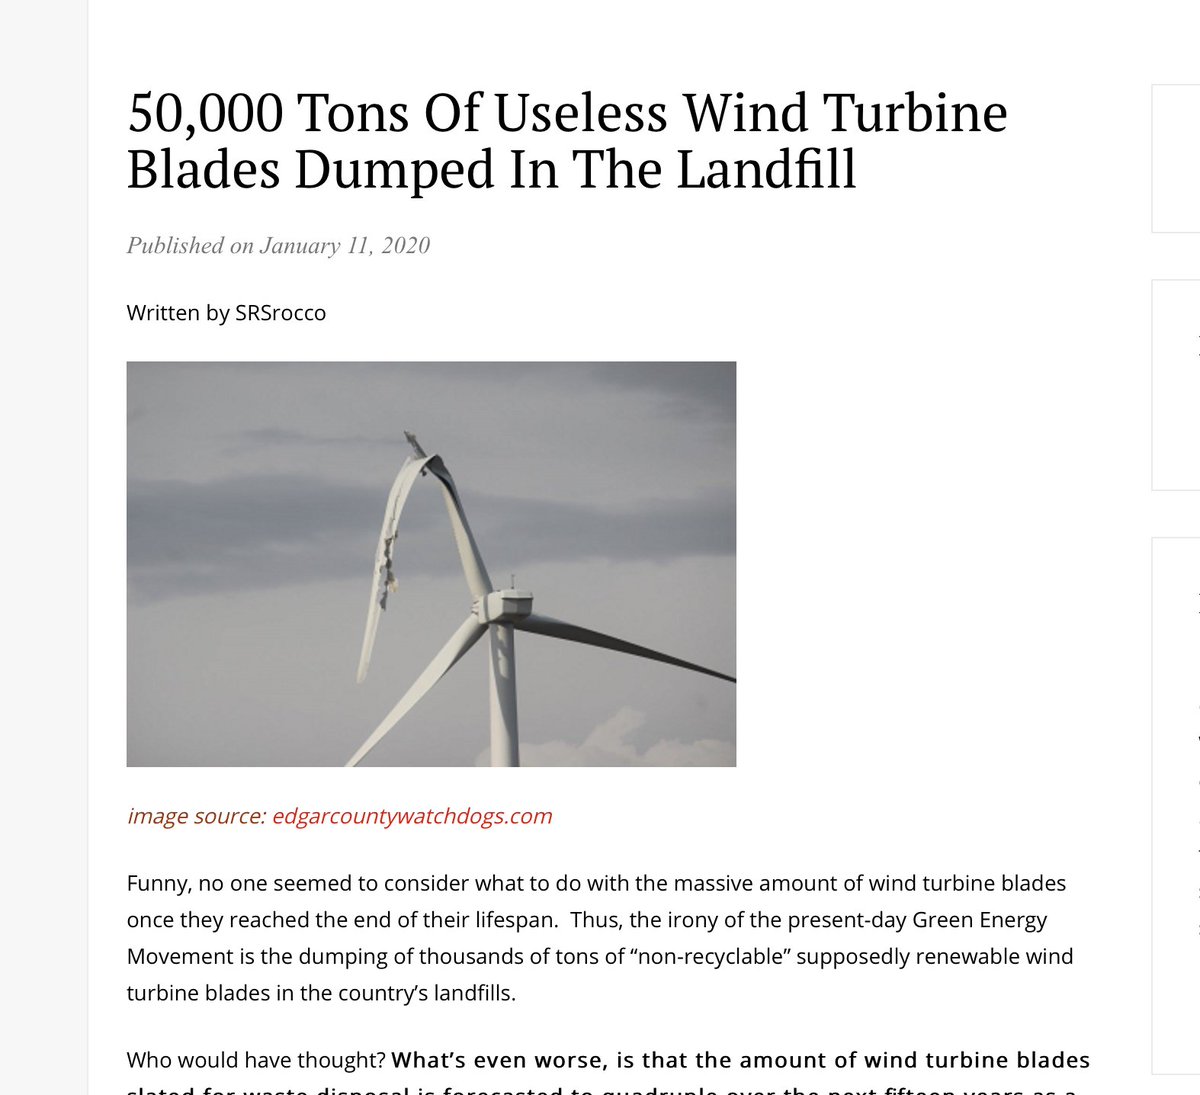 These Wind Turbines are toxic, being placed in landfills and not recyclable. The government/media hide stories and studies about adverse effects on the people/animals w/in a 75 mile radius of these turbines.